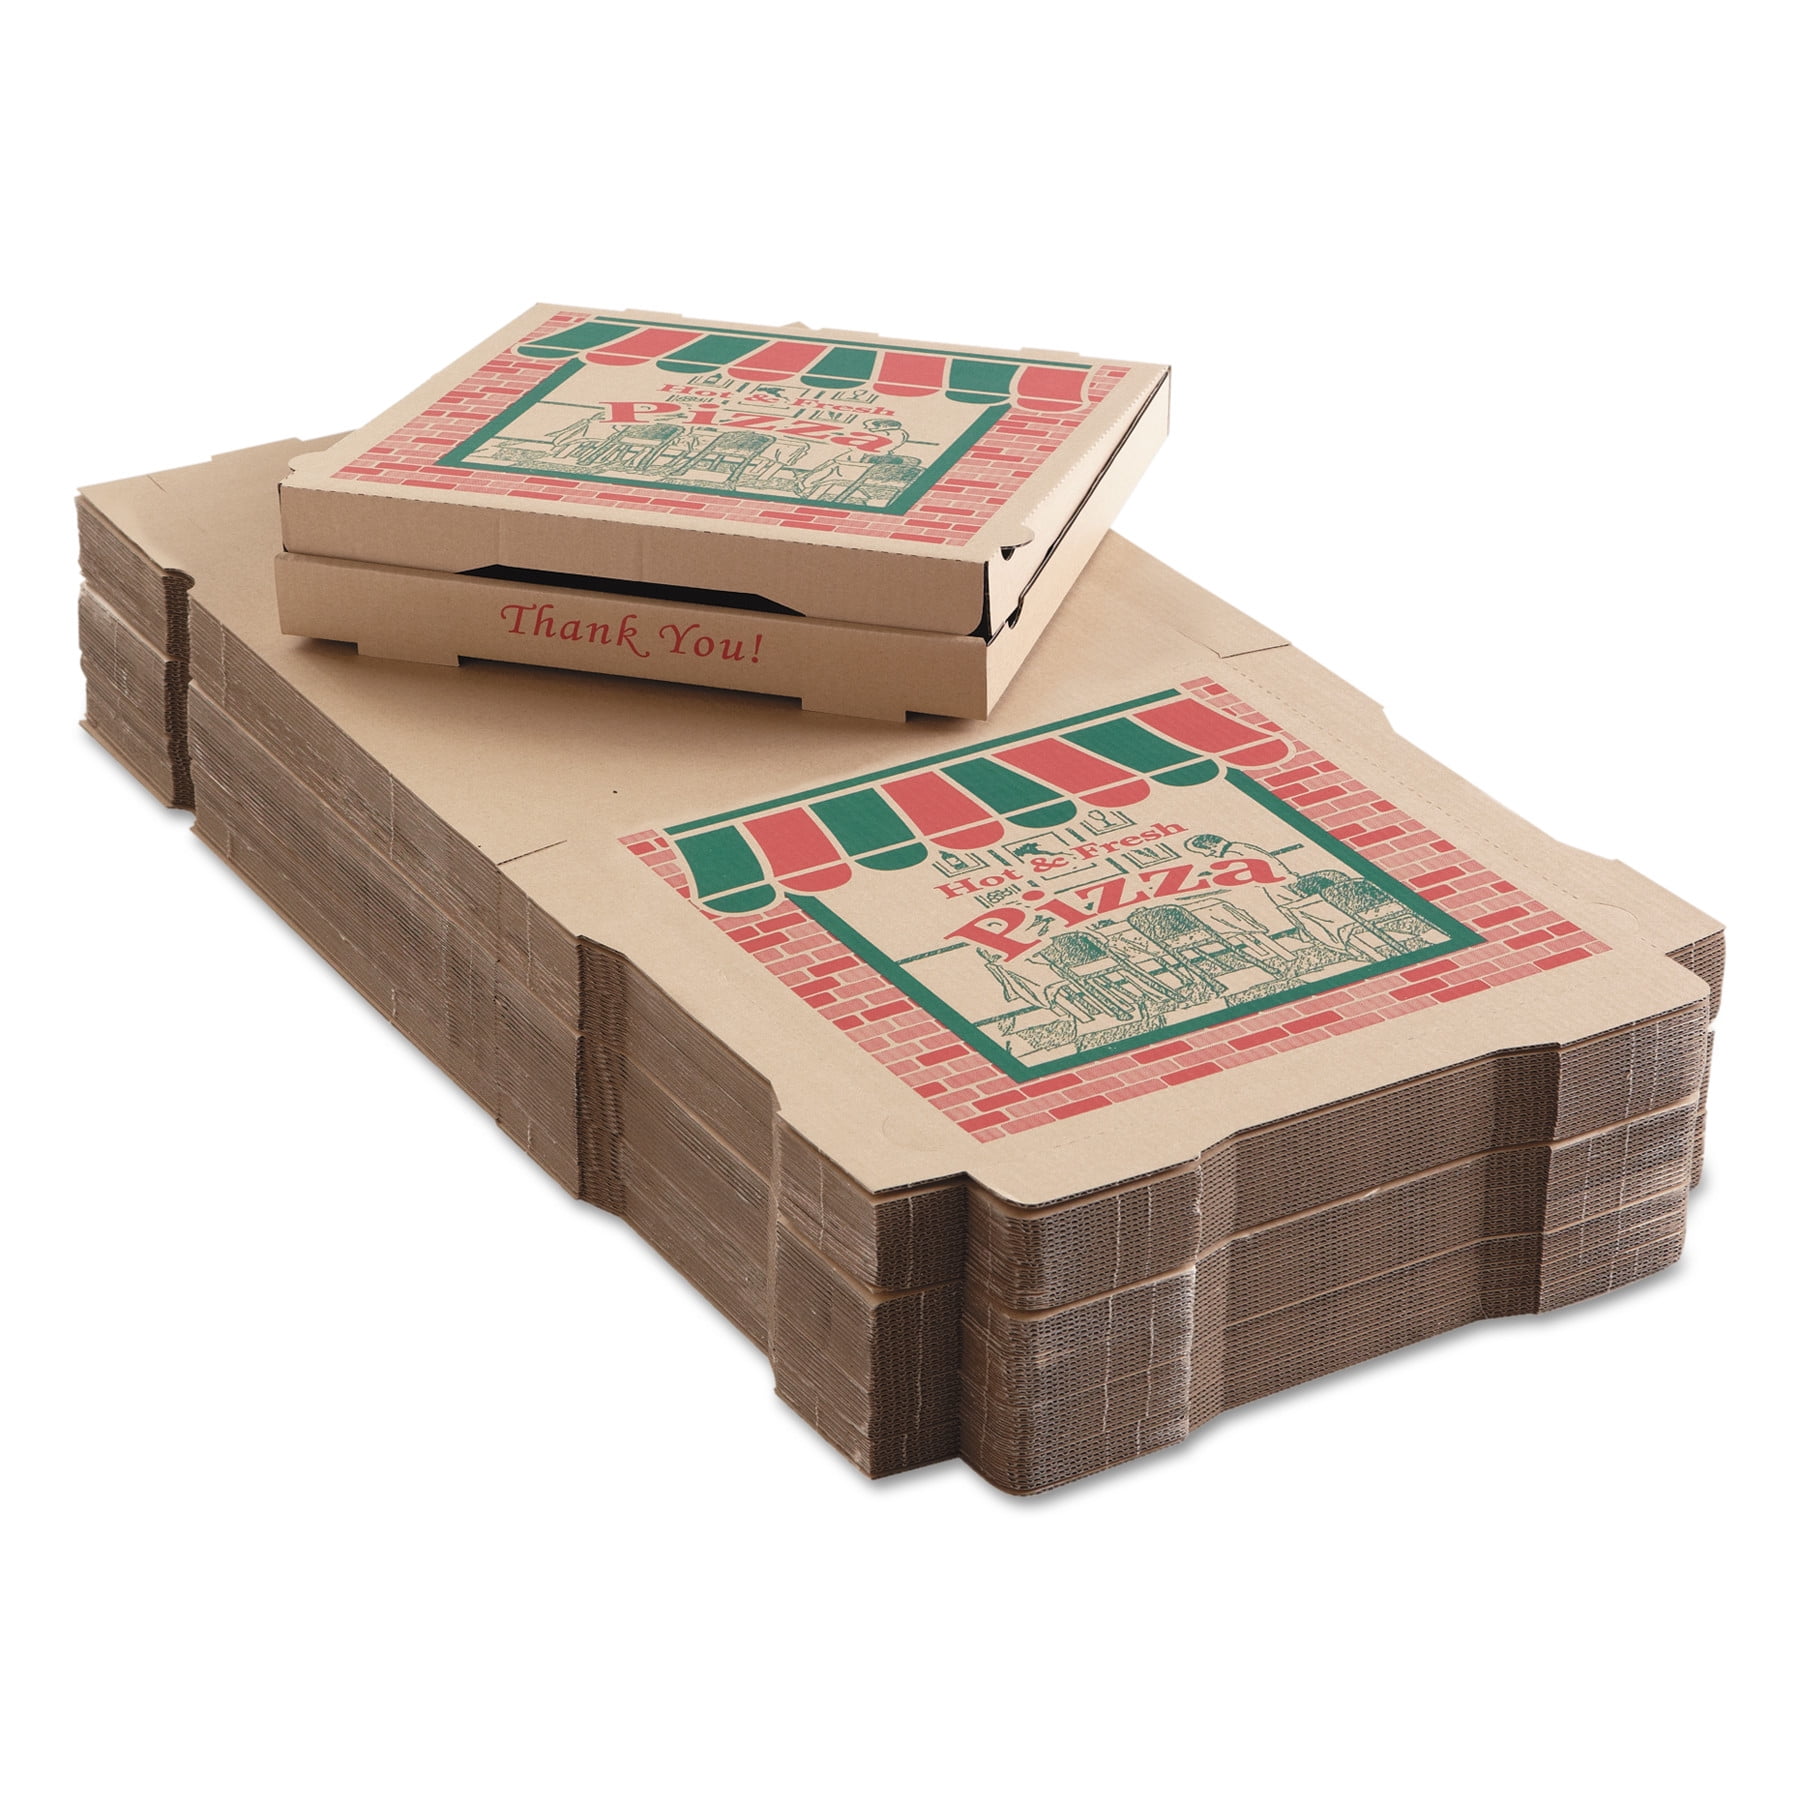 Arvco Corrugated Pizza Boxes 16w X 16d X 1 3/4h Kraft 9164314 for sale online 